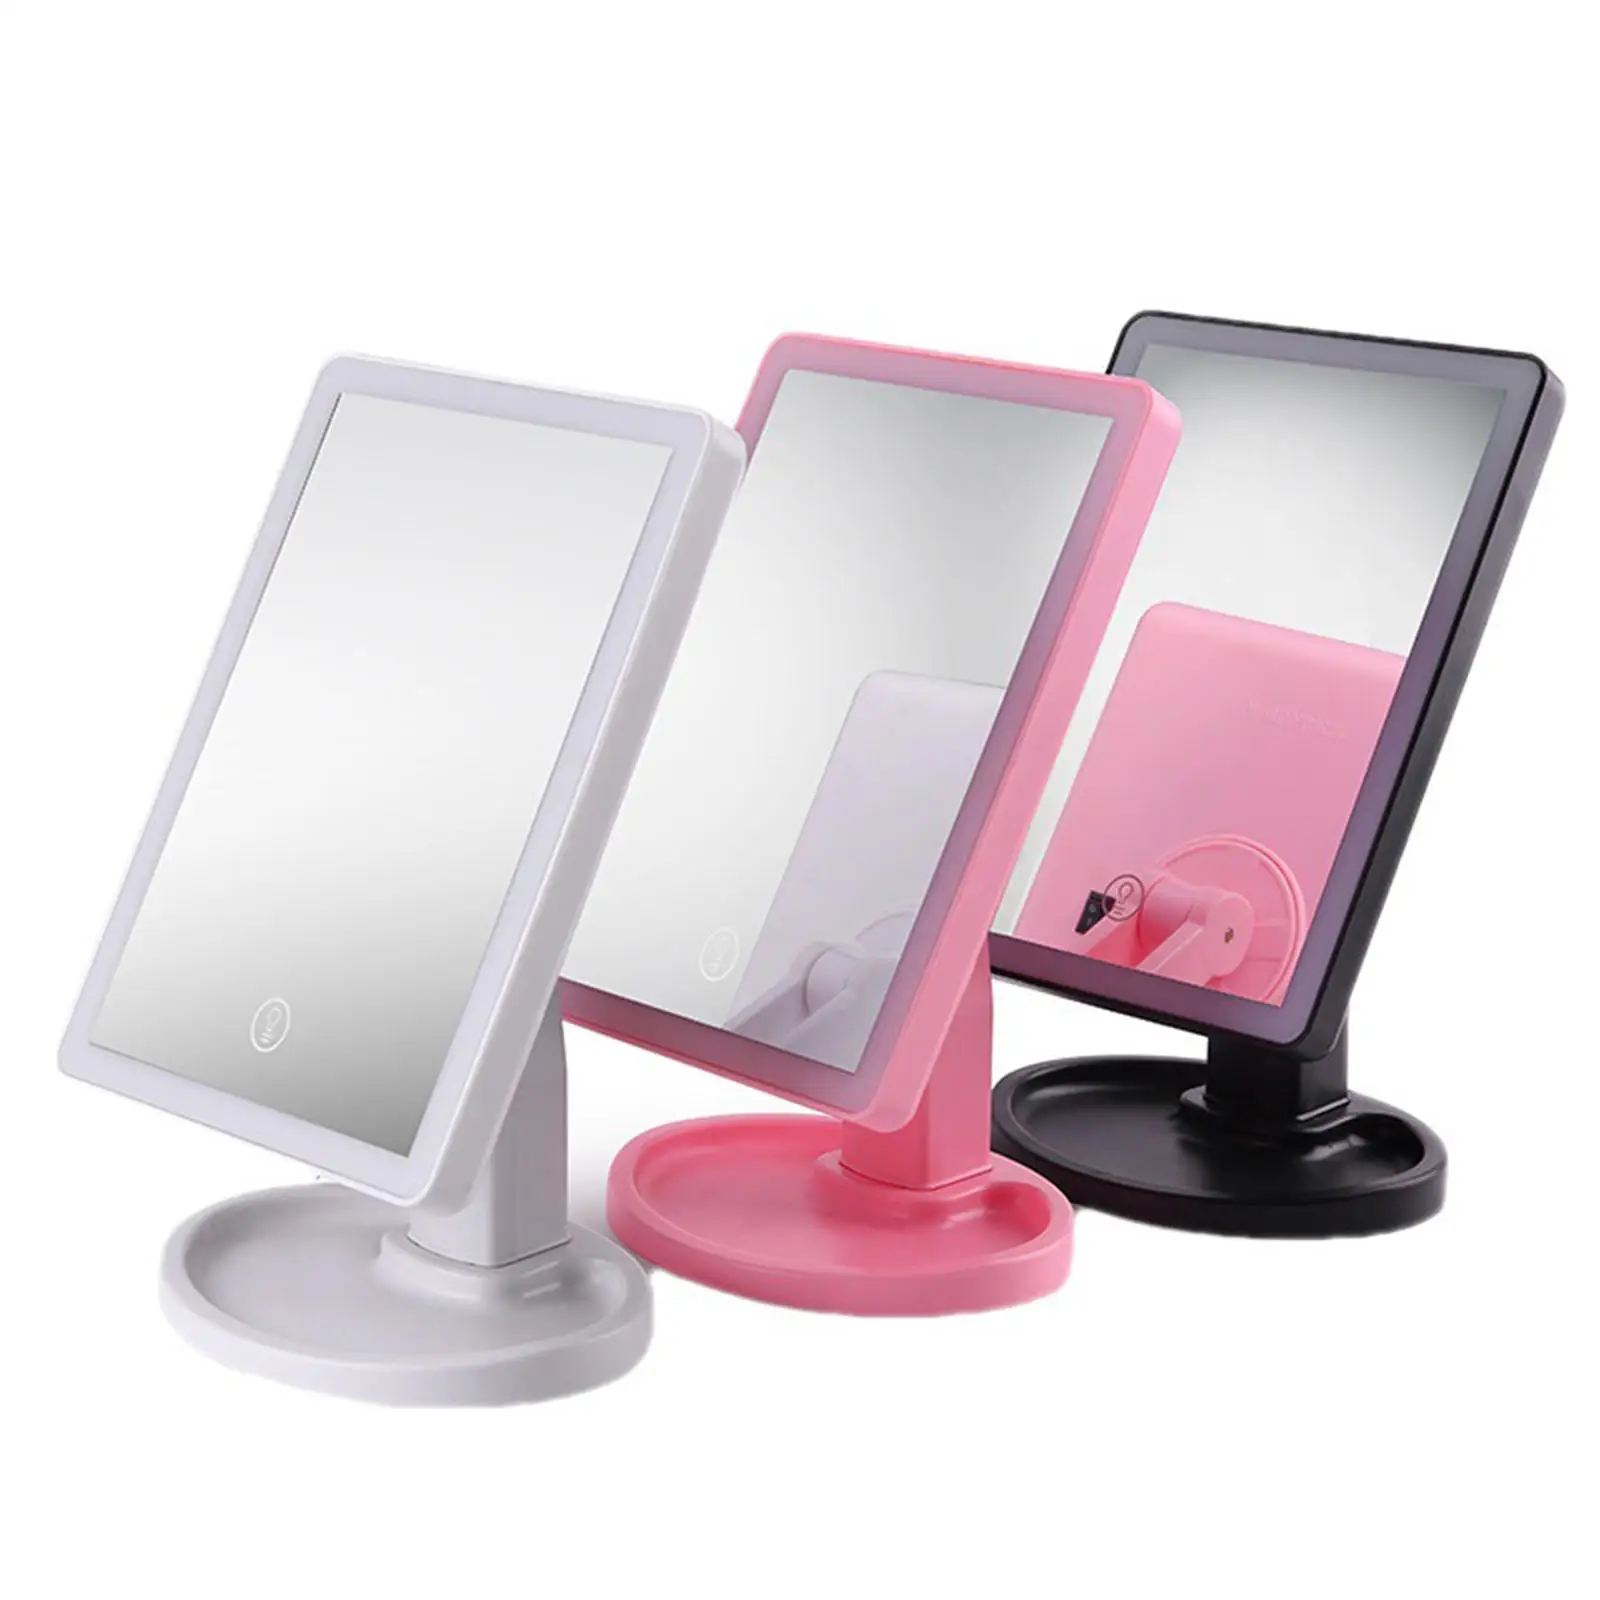 Makeup Mirror with Lights Dimmable Lights Desk Vanity Mirror Illuminated Mirror USB Rechargeable for Make Up Women Gift